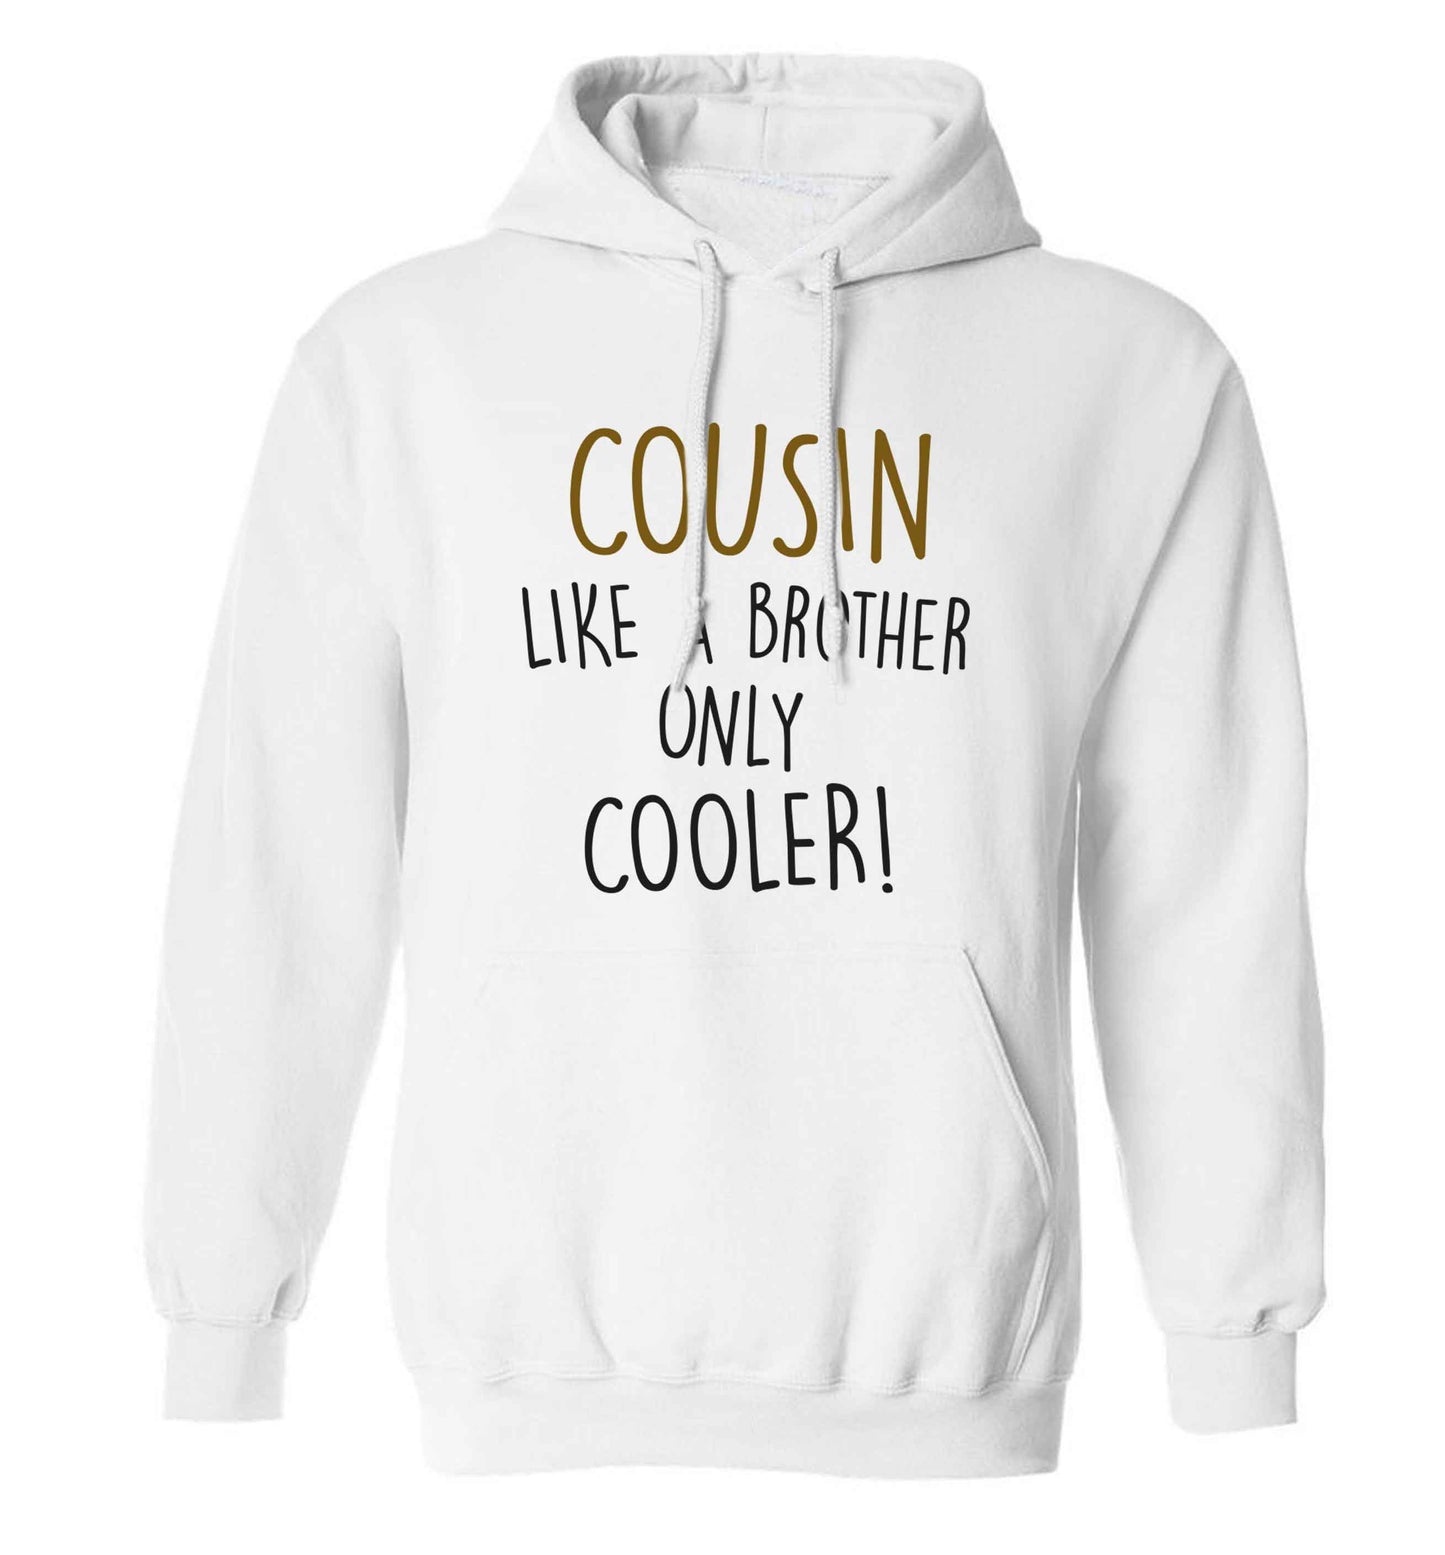 Cousin like a brother only cooler adults unisex white hoodie 2XL